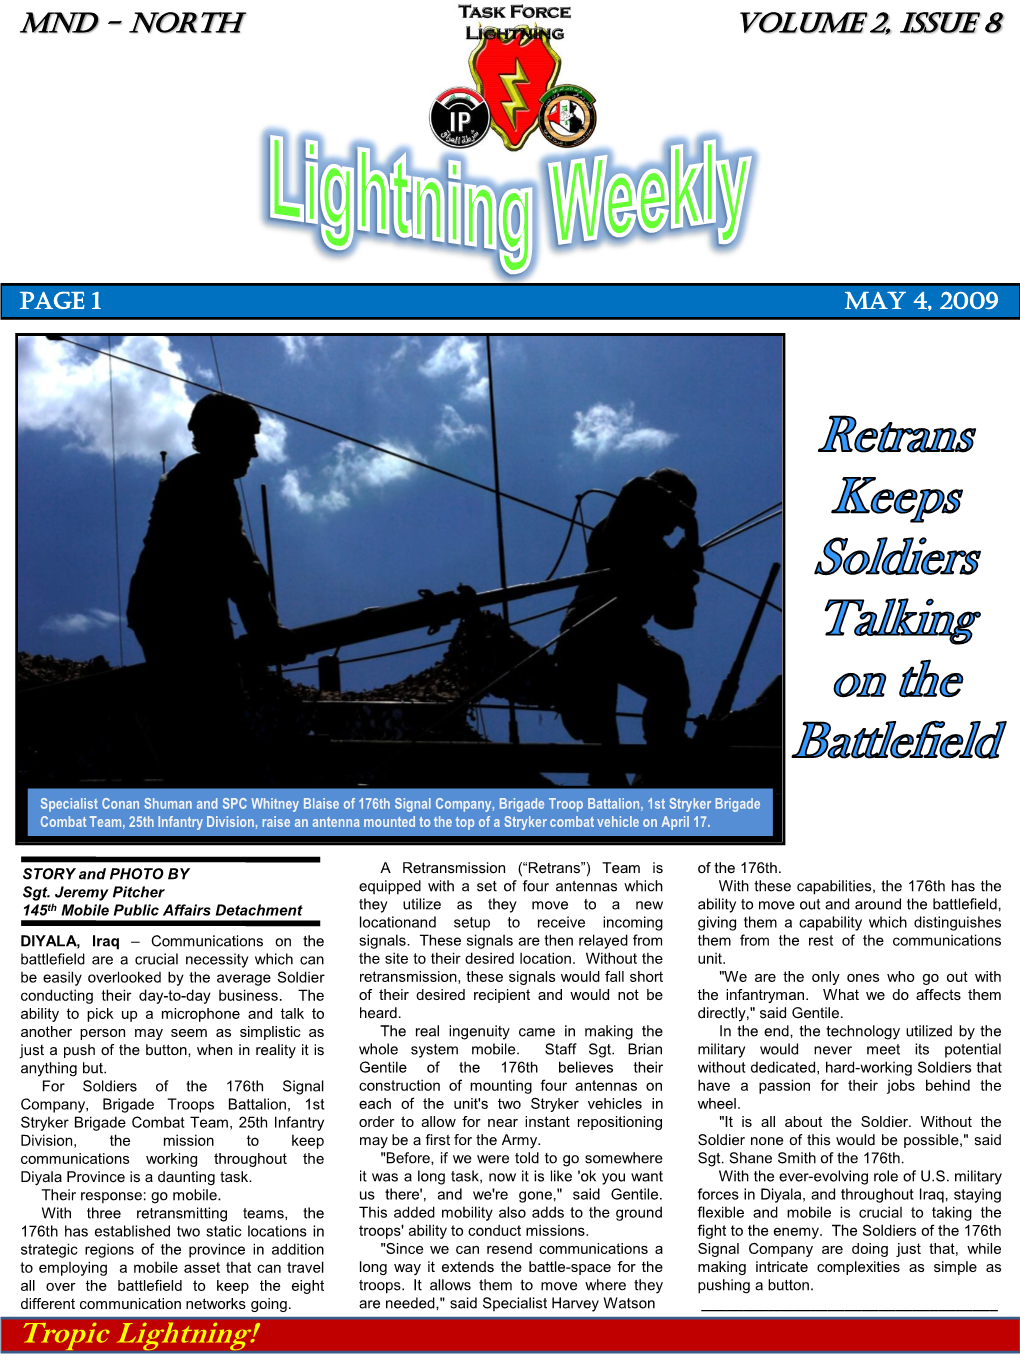 Tropic Lightning! PAGE 2 MAY 4, 2009 the “Eye in the Sky" Keeps Soldiers out of Harm's Way